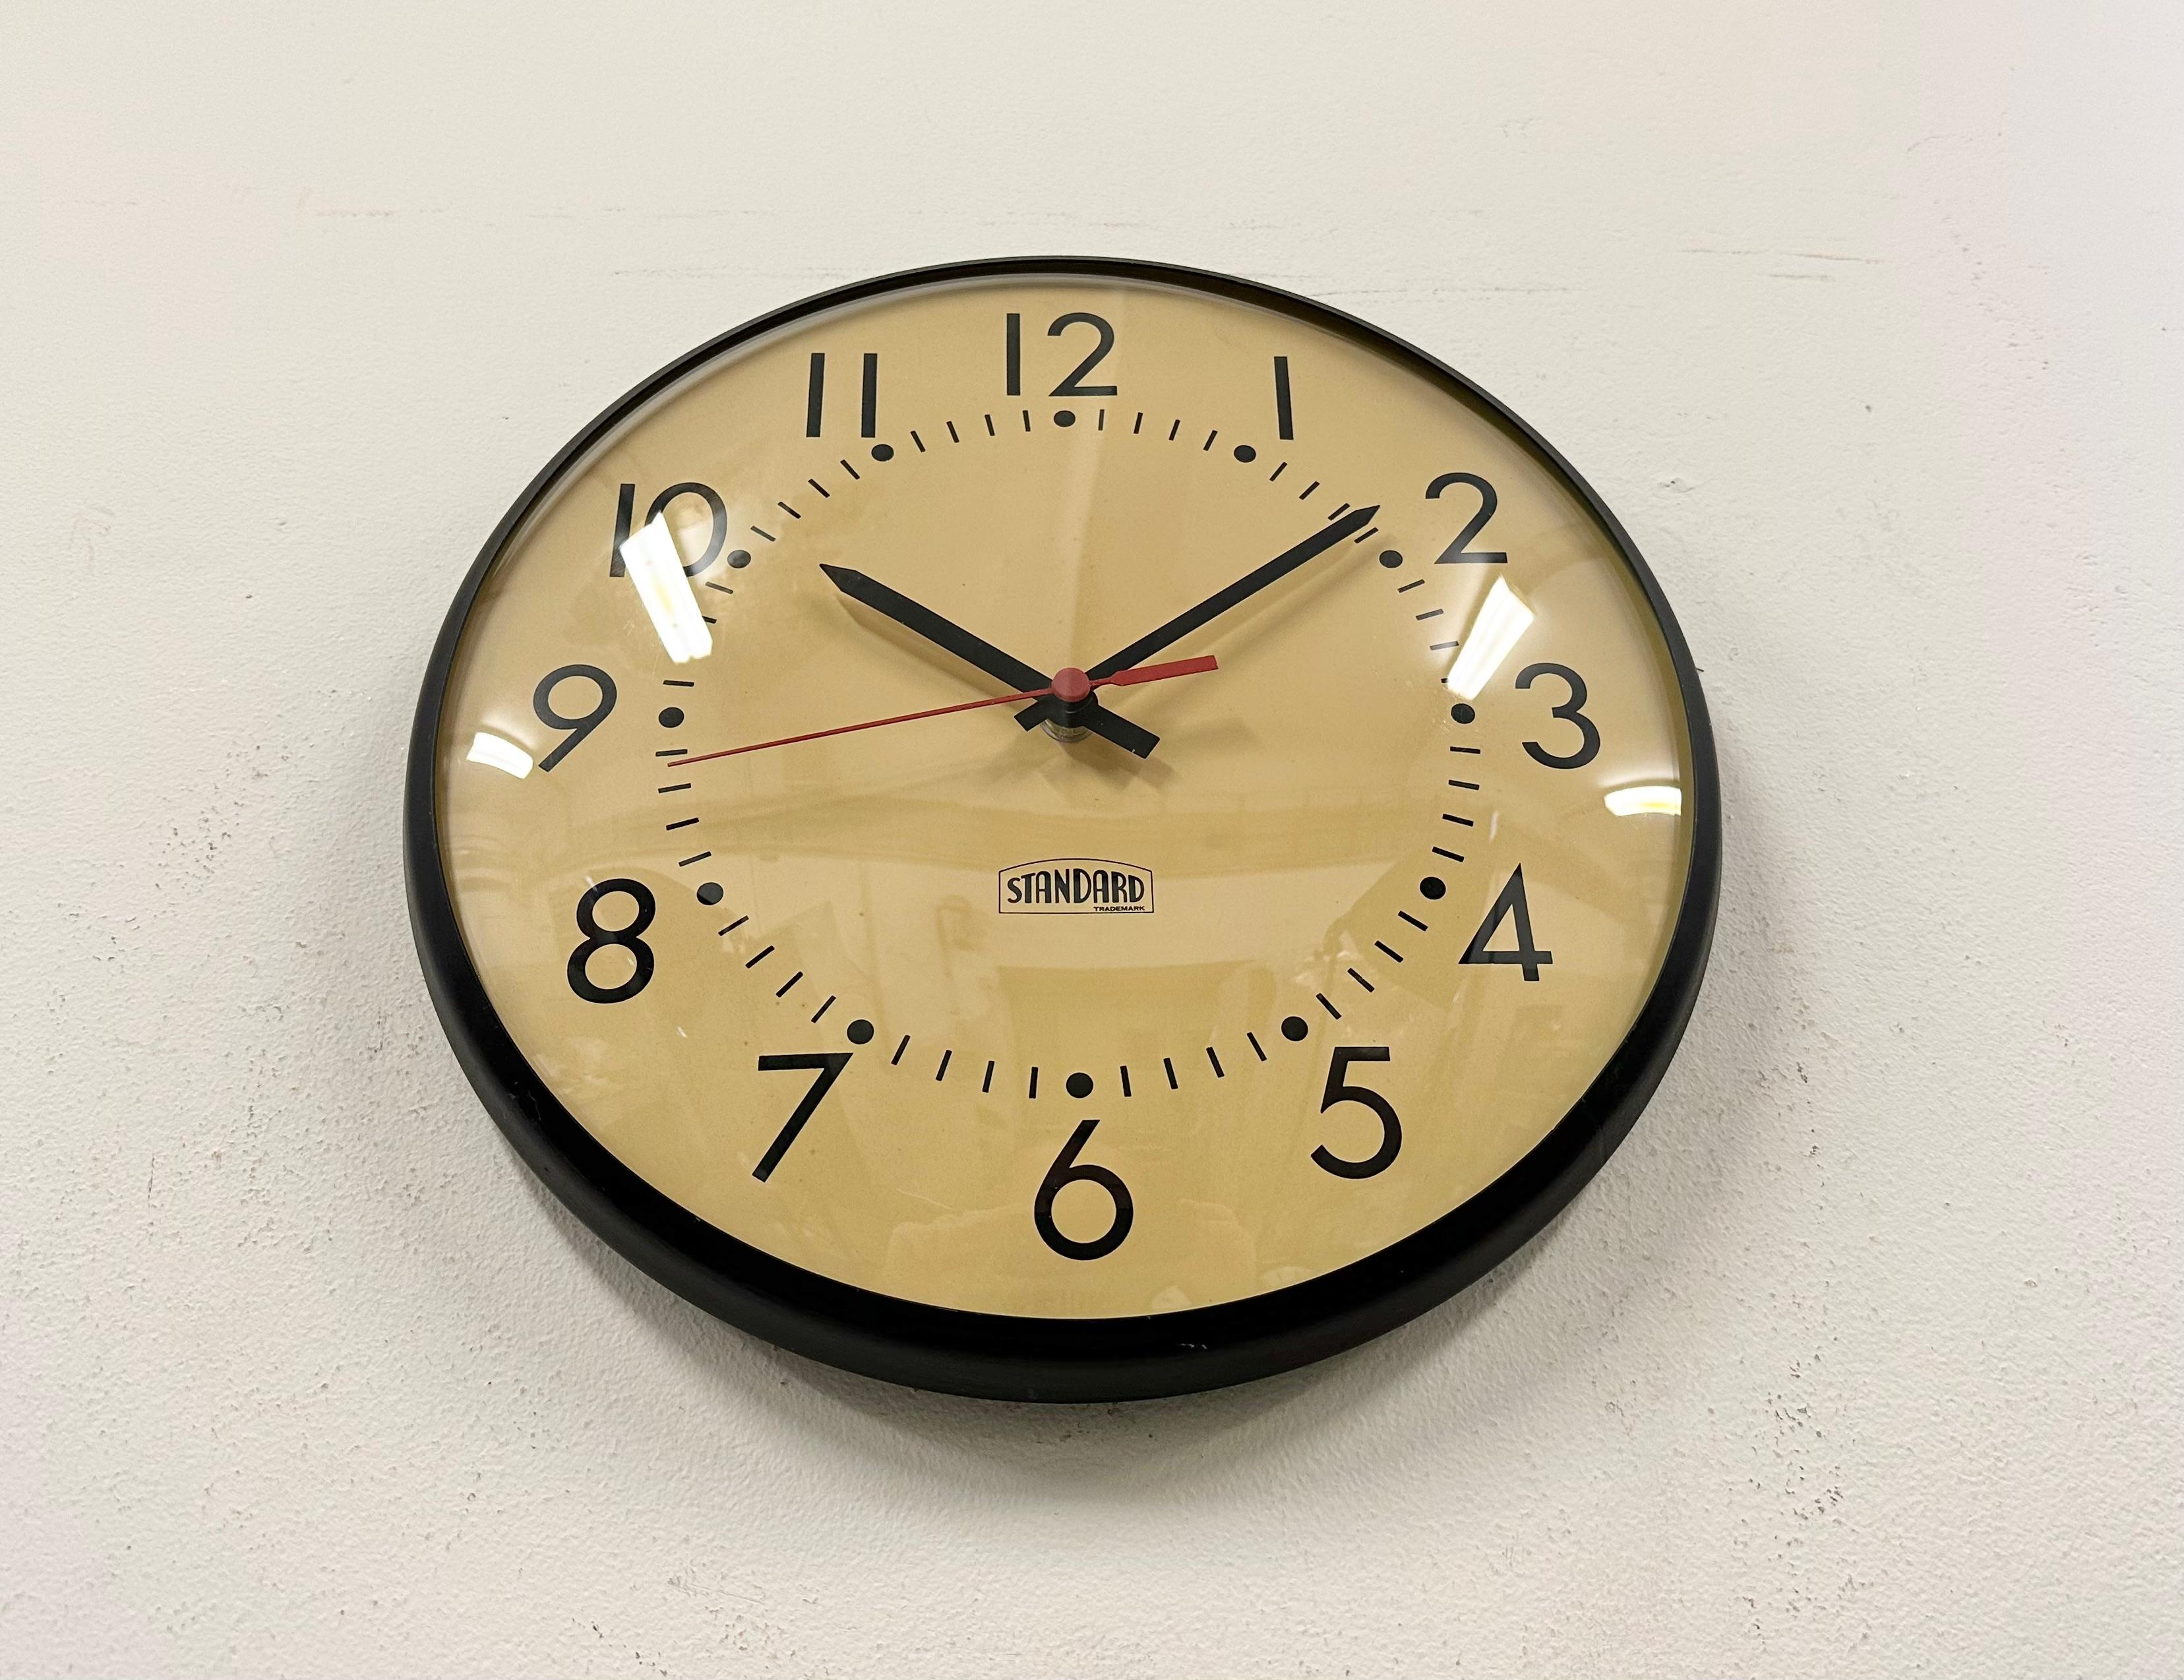 American Vintage School Wall Clock from Standard Electric, 1970s